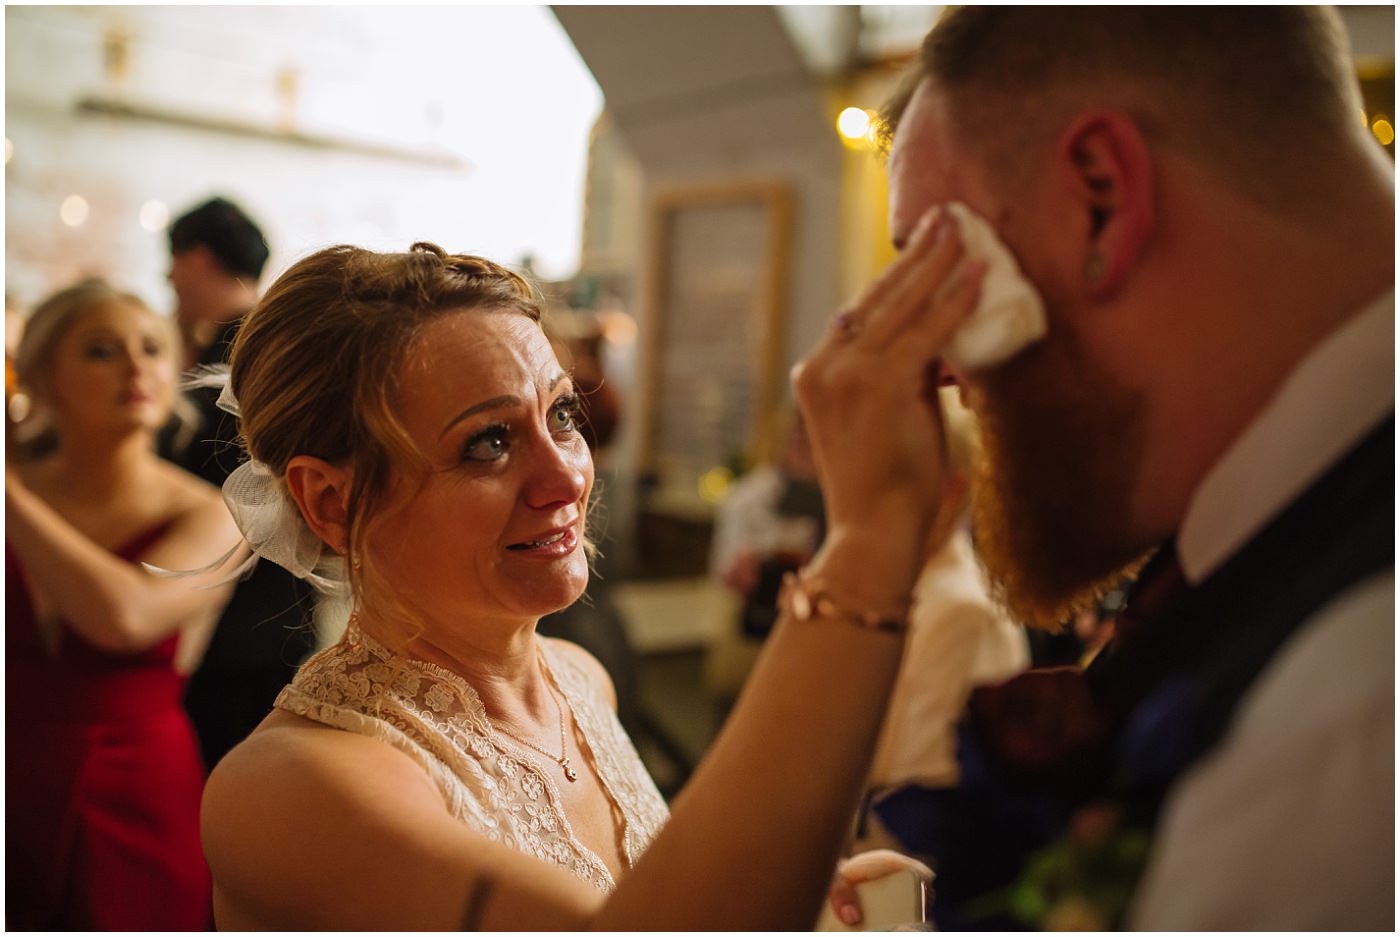 Mum wipes tears from son at manchester wedding